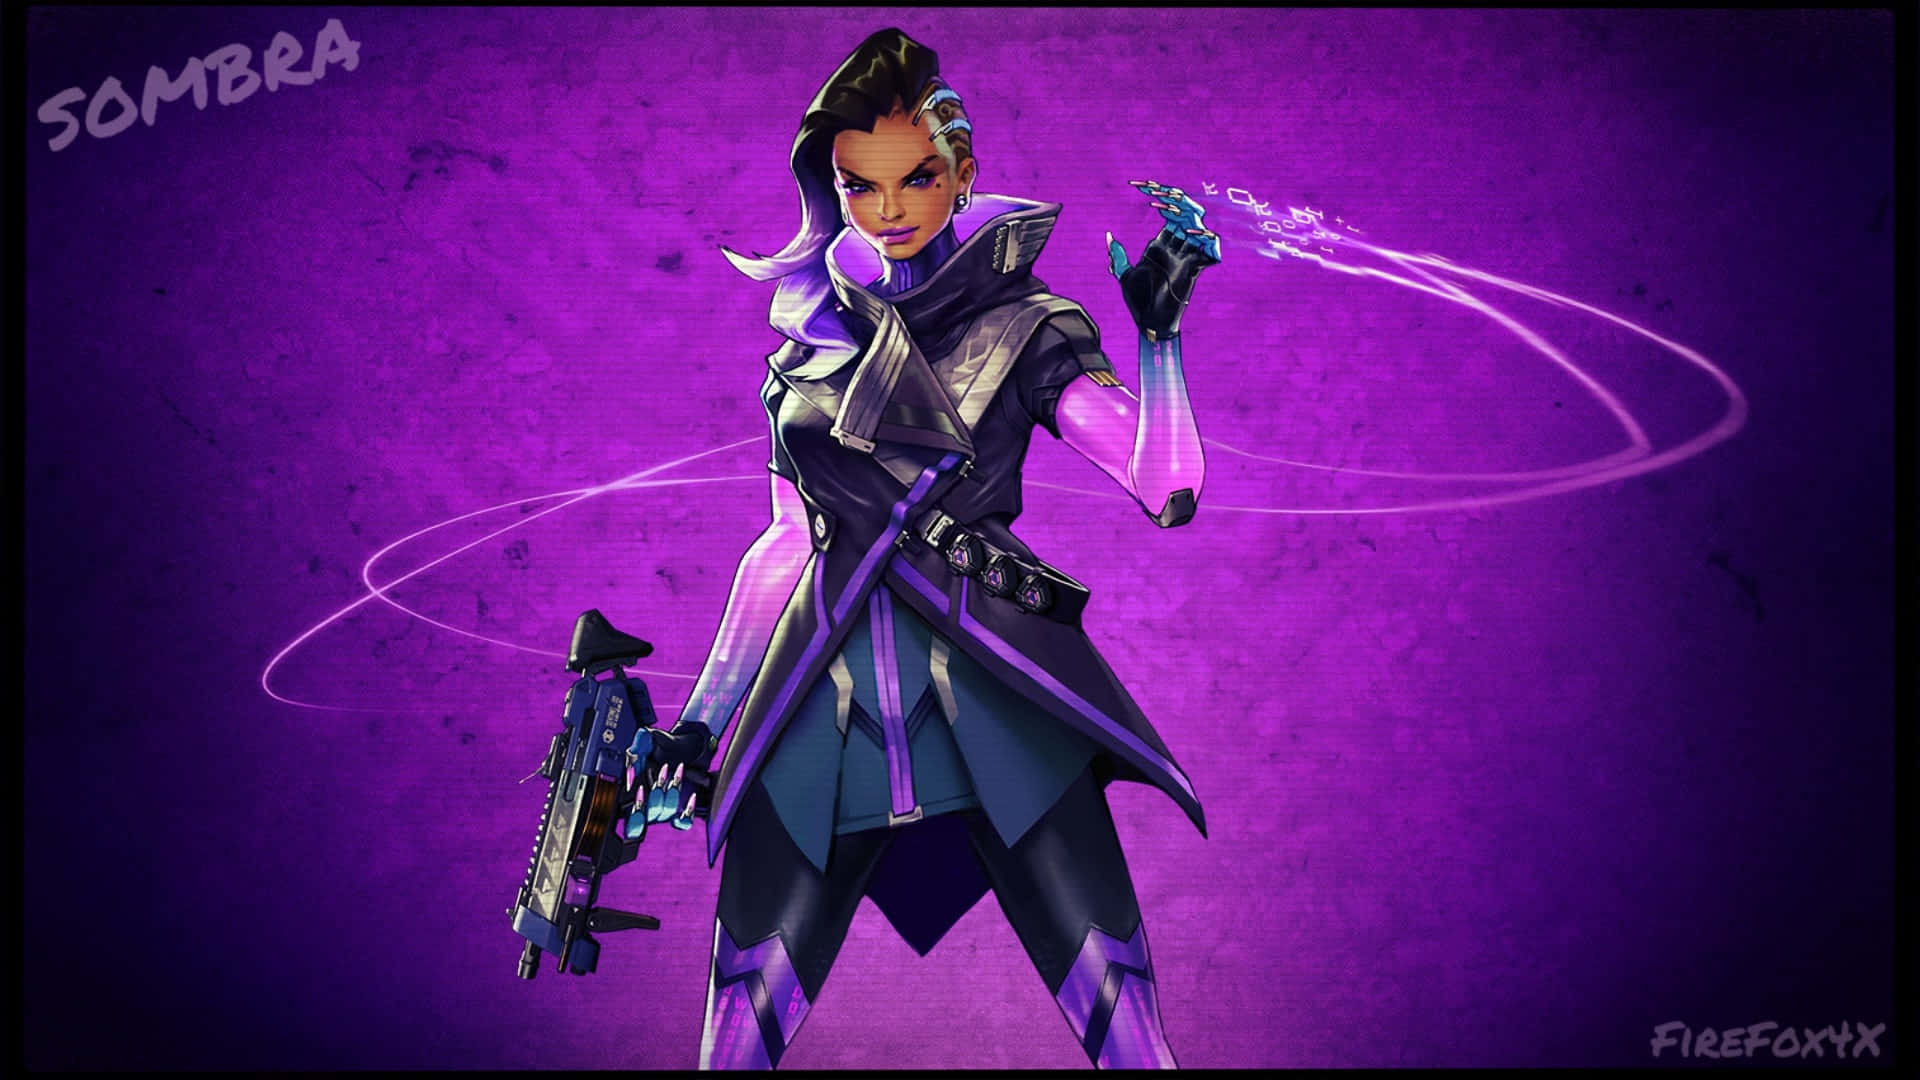 Caption: Sombra From Overwatch In Stealth Mode Wallpaper